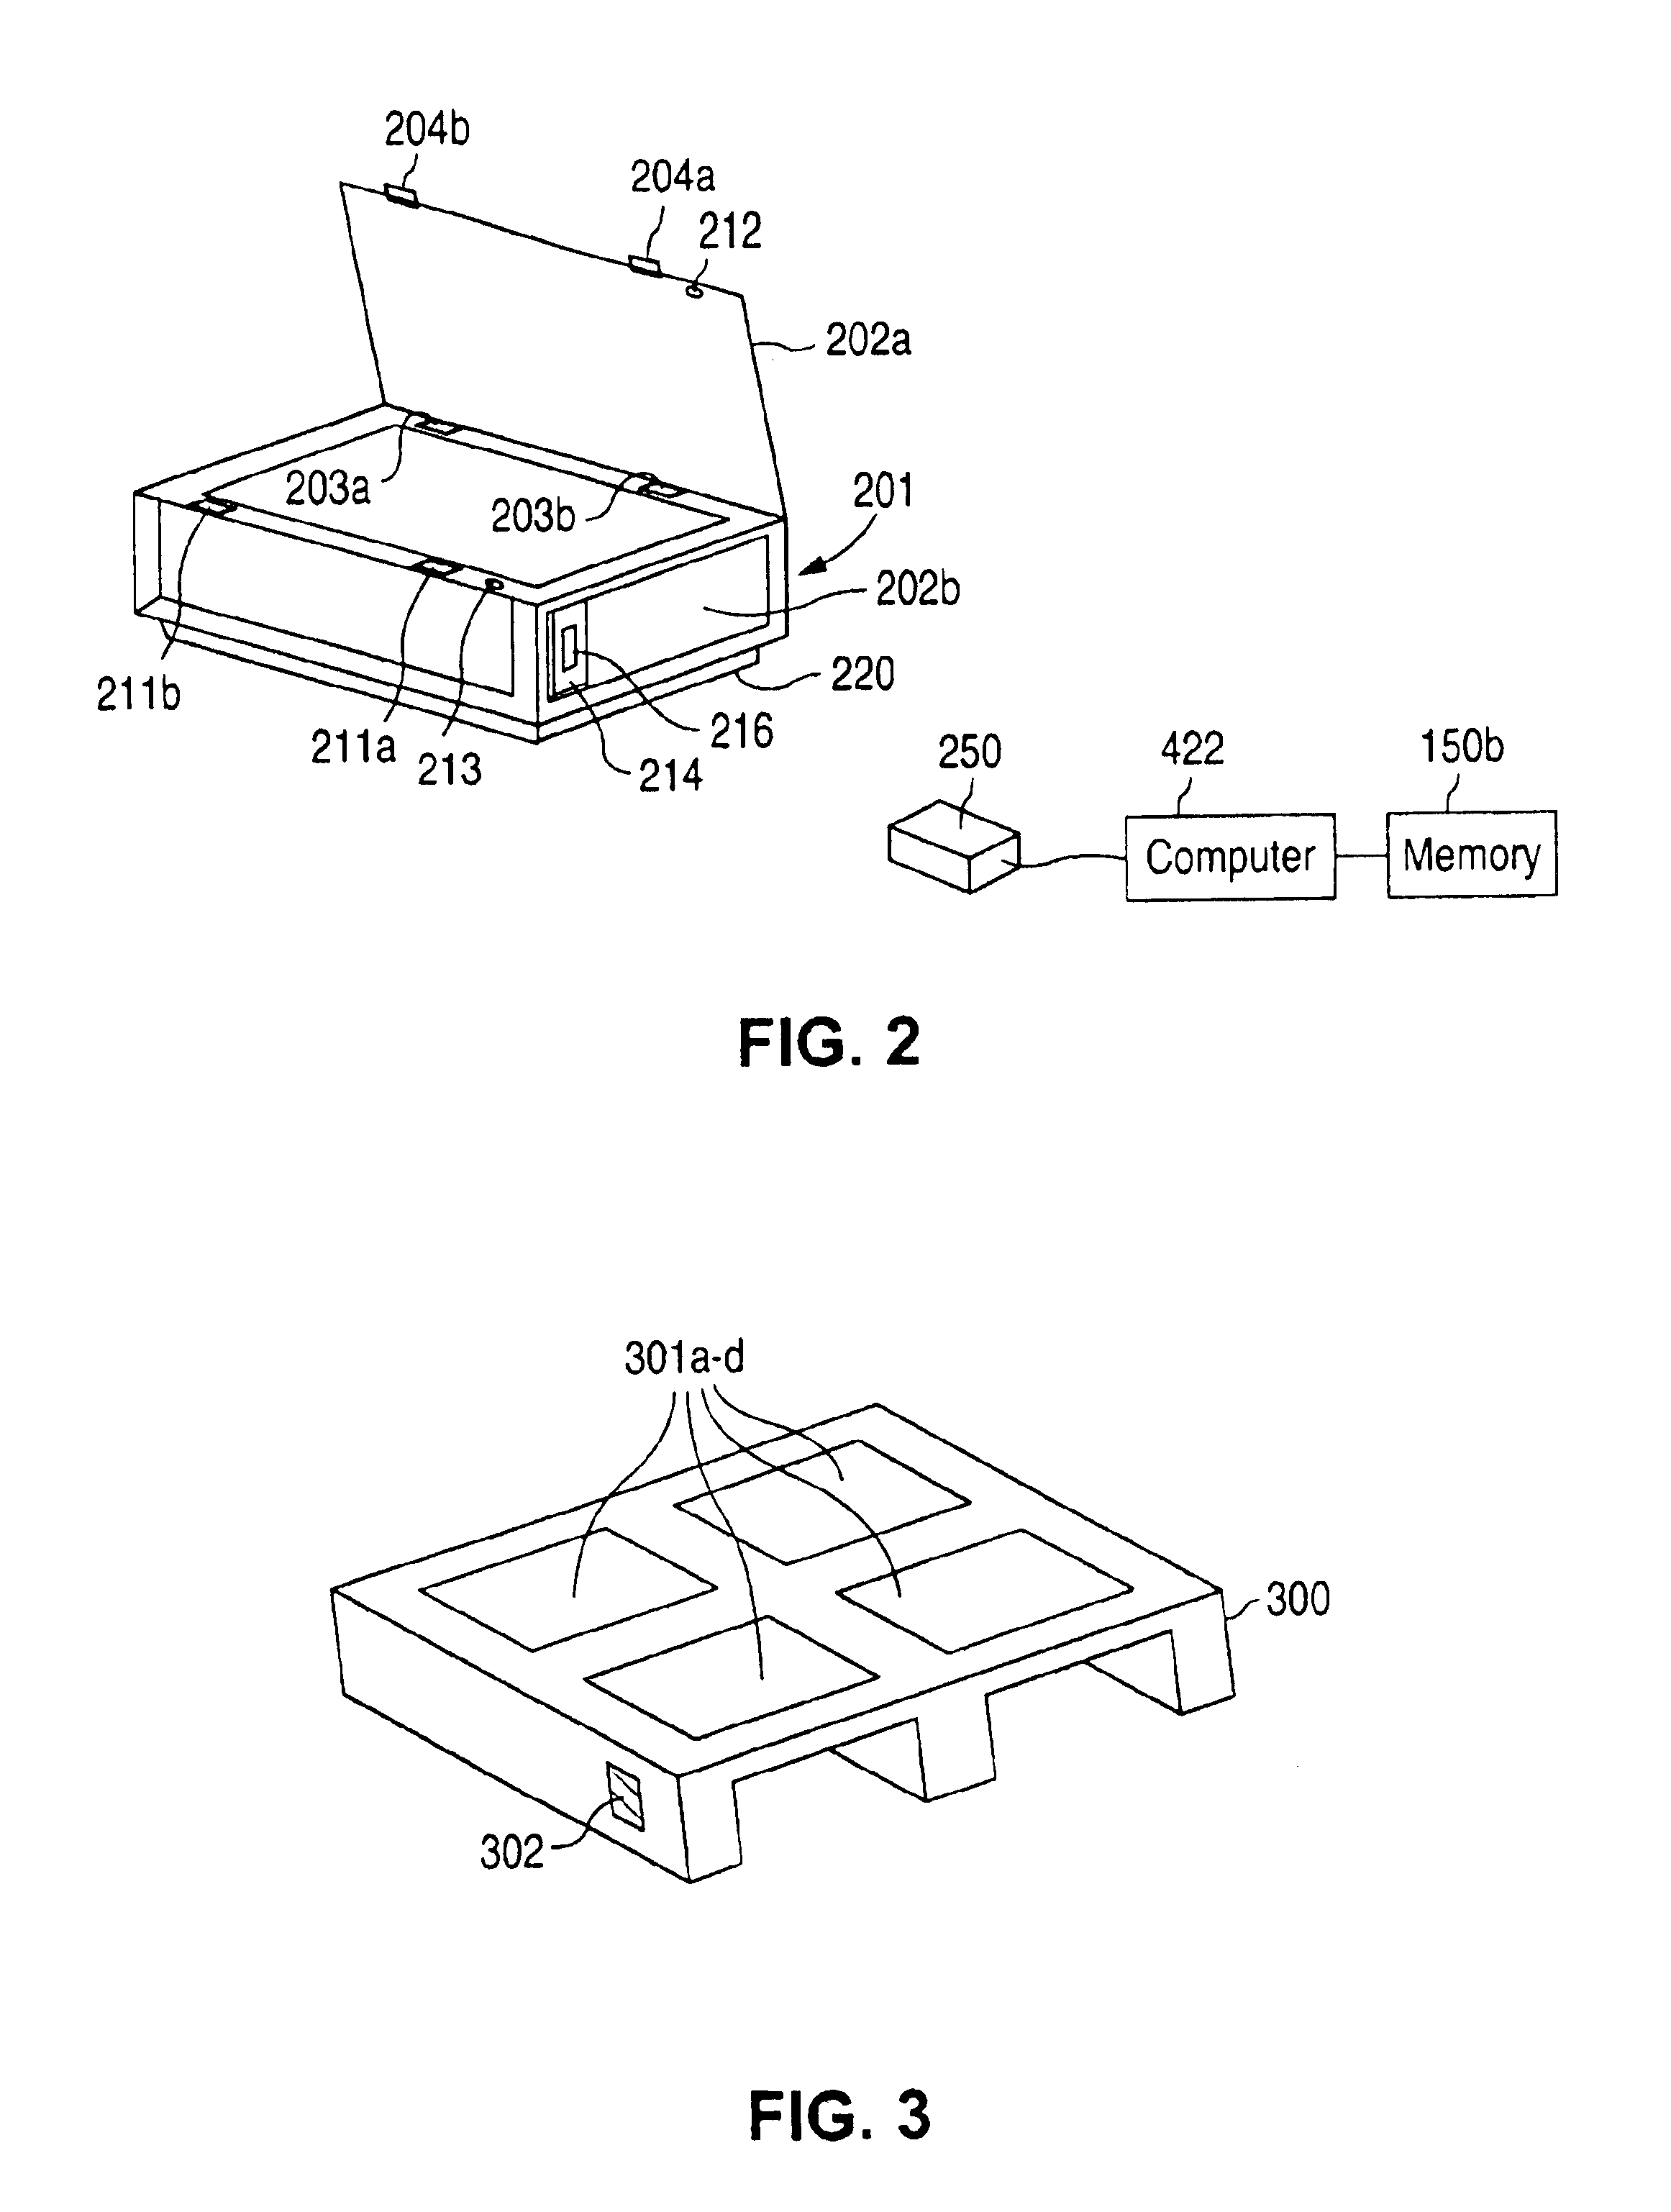 System and method for amalgamating multiple shipping companies using reusable containers and wide area networks